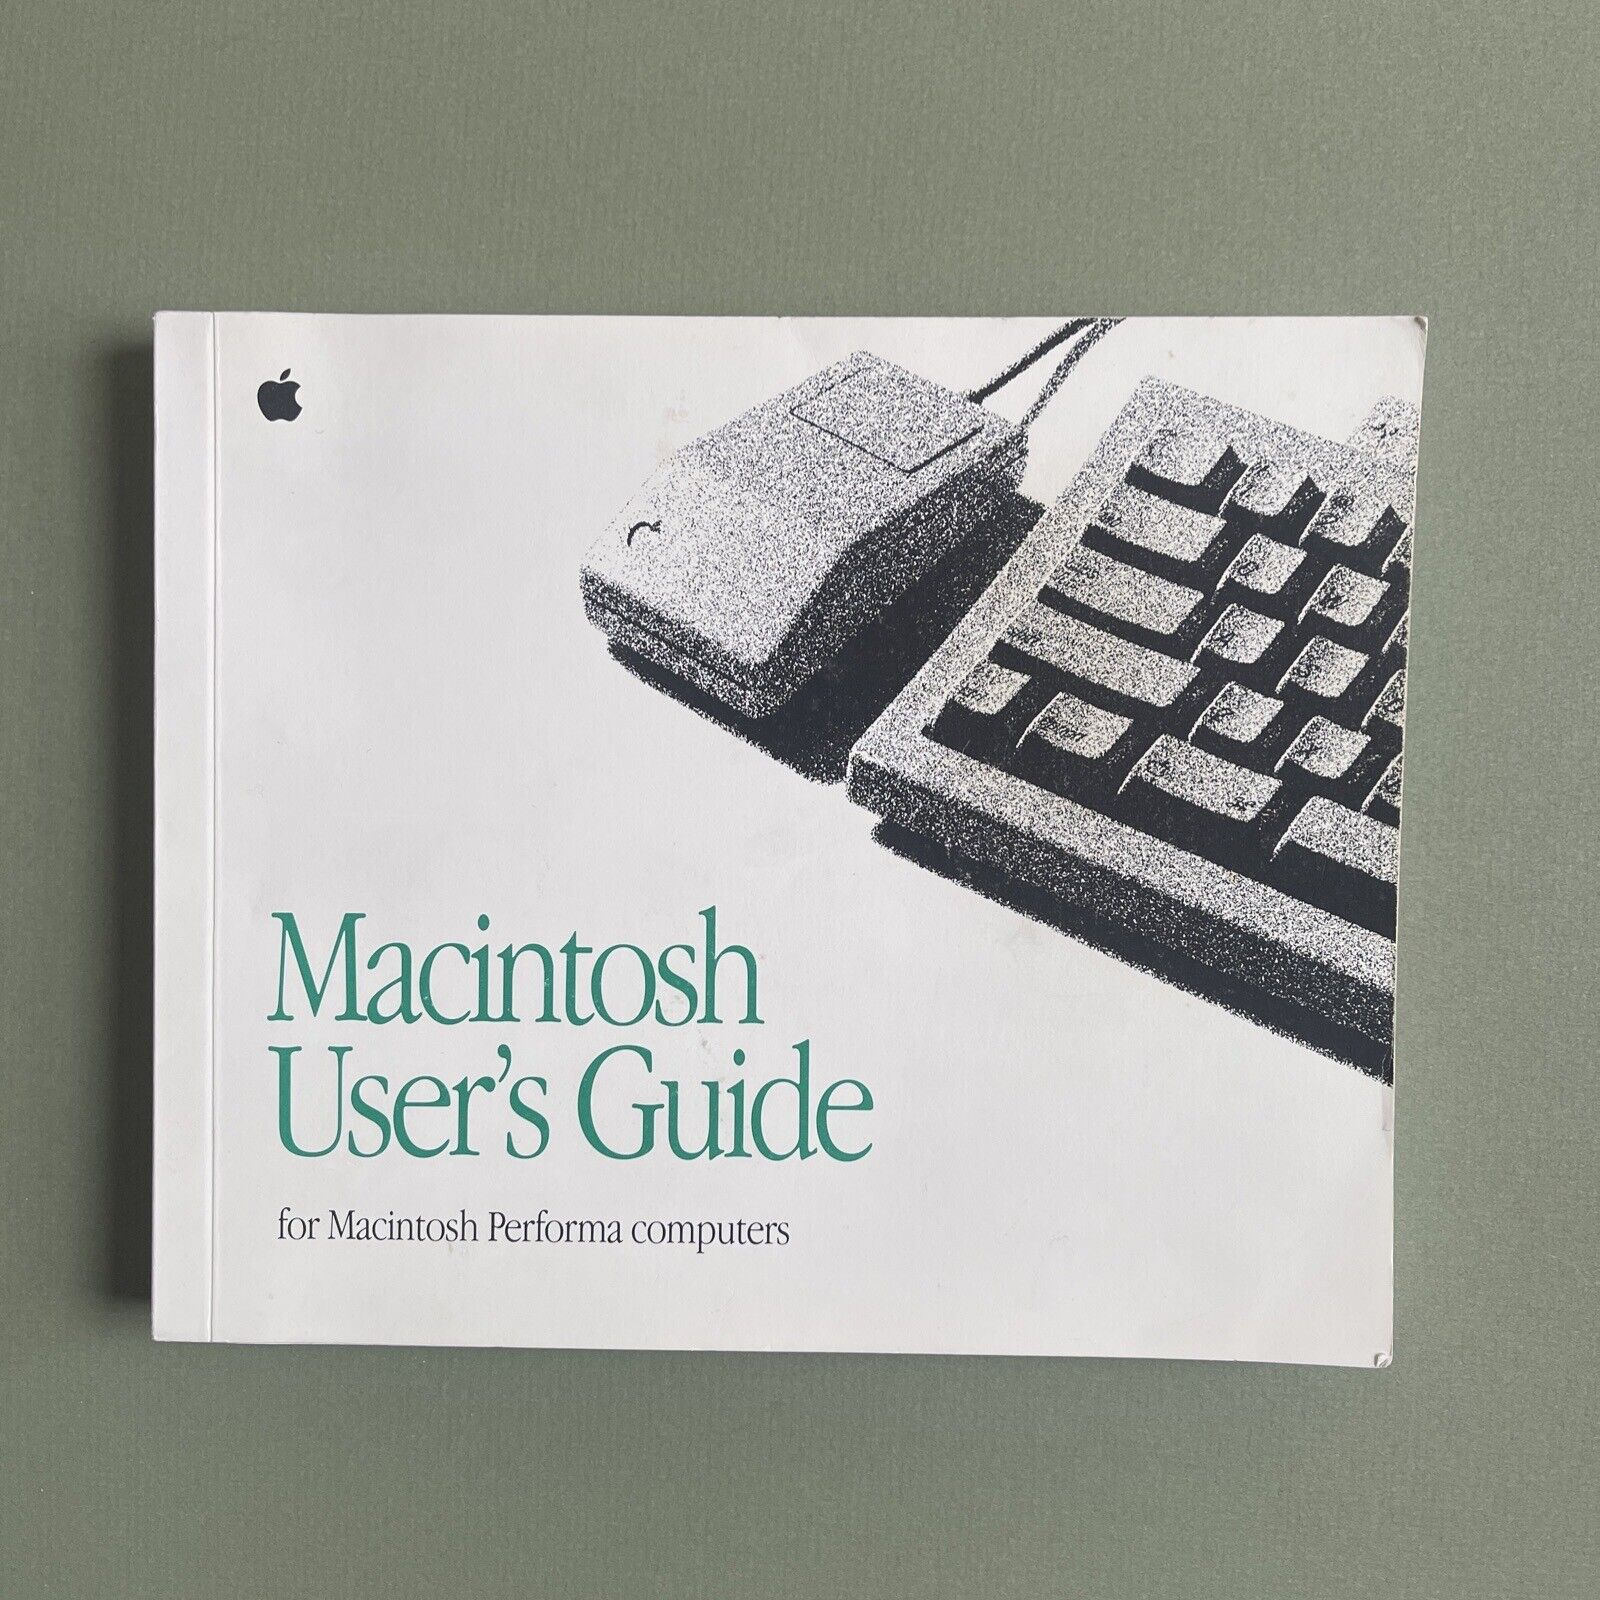 Vintage Apple Macintosh User\'s Guide for Performa Computers 1992 030-2665-A